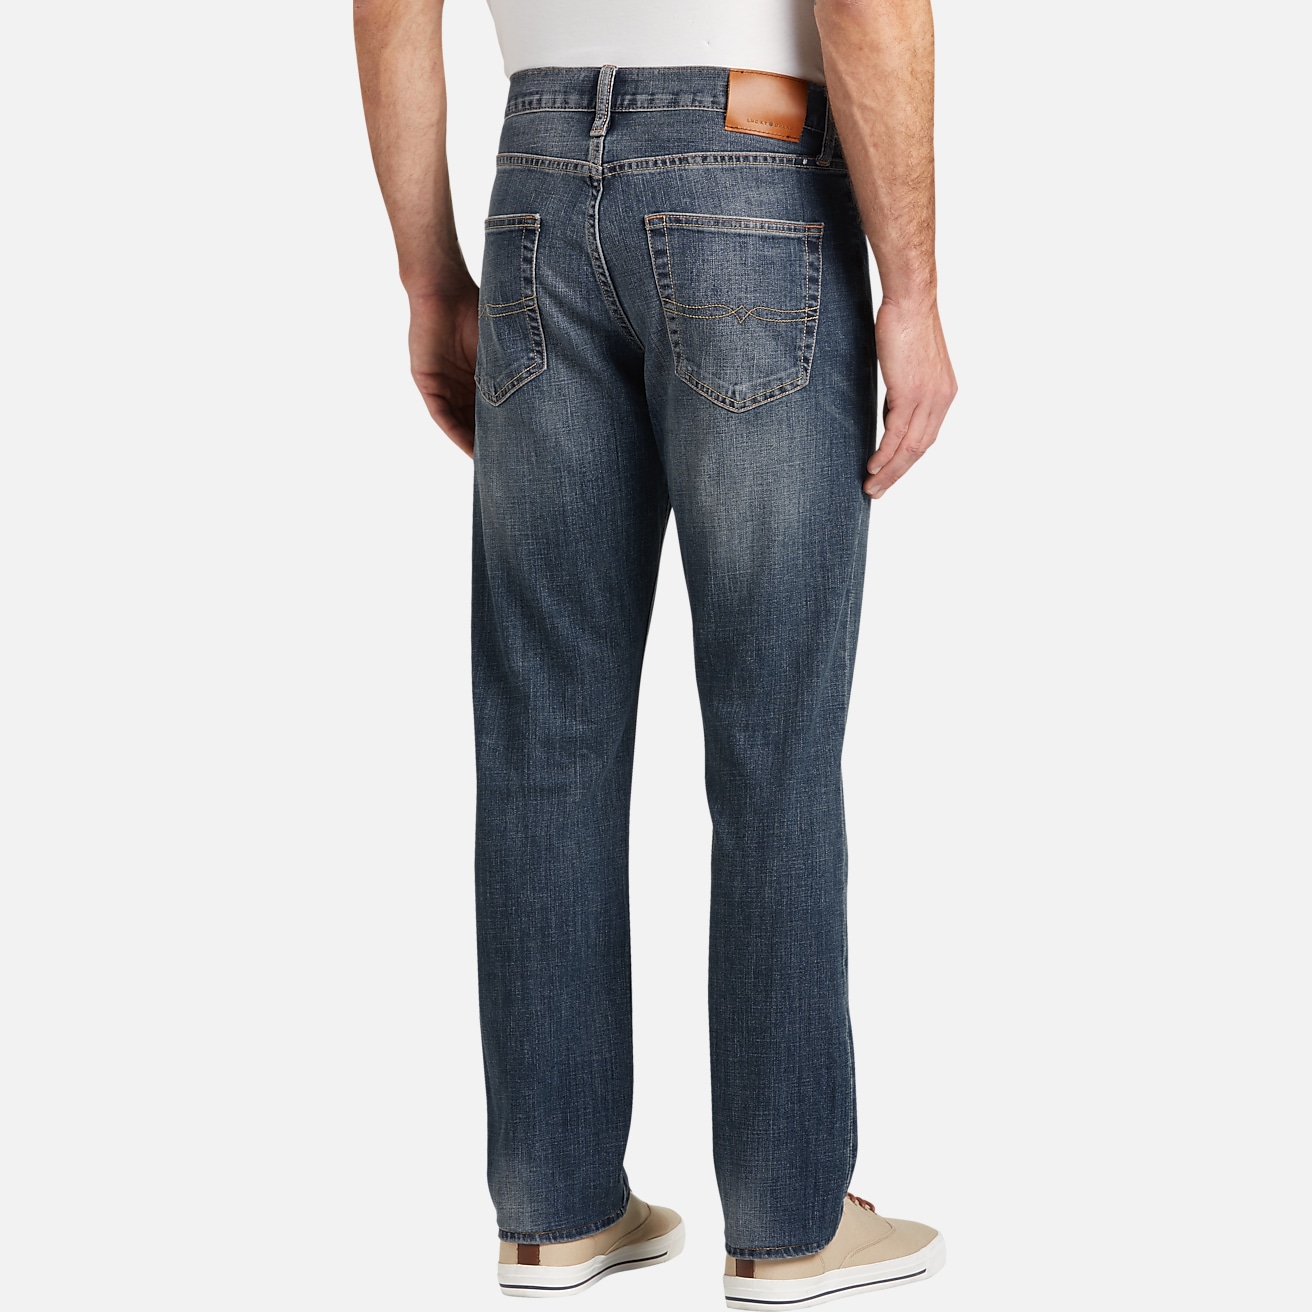 Lucky Brand 410 Arched Rock Athletic Fit Jeans